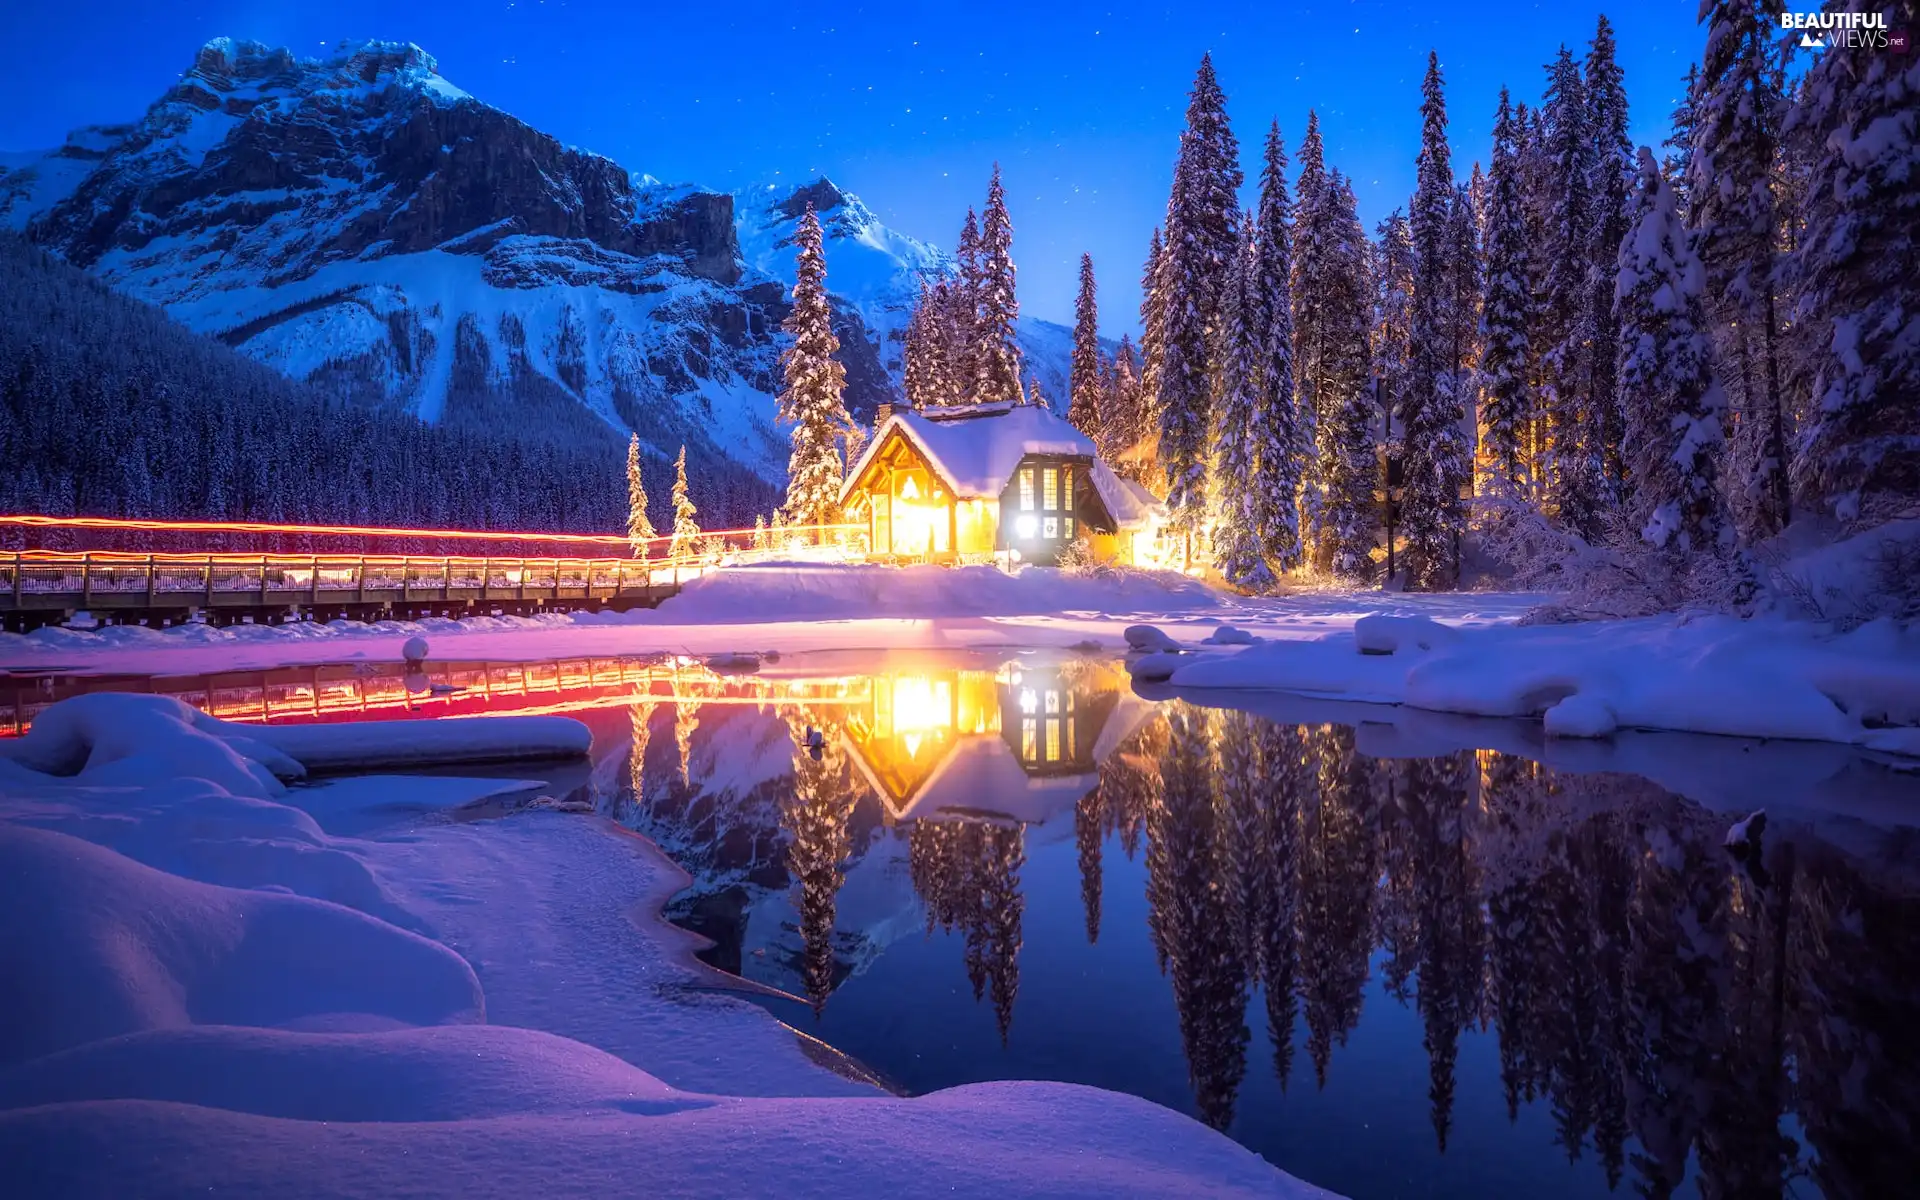 trees, forest, viewes, house, Emerald Lake, Province of British Columbia, Mountains, winter, Canada, Floodlit, lake, Yoho National Park